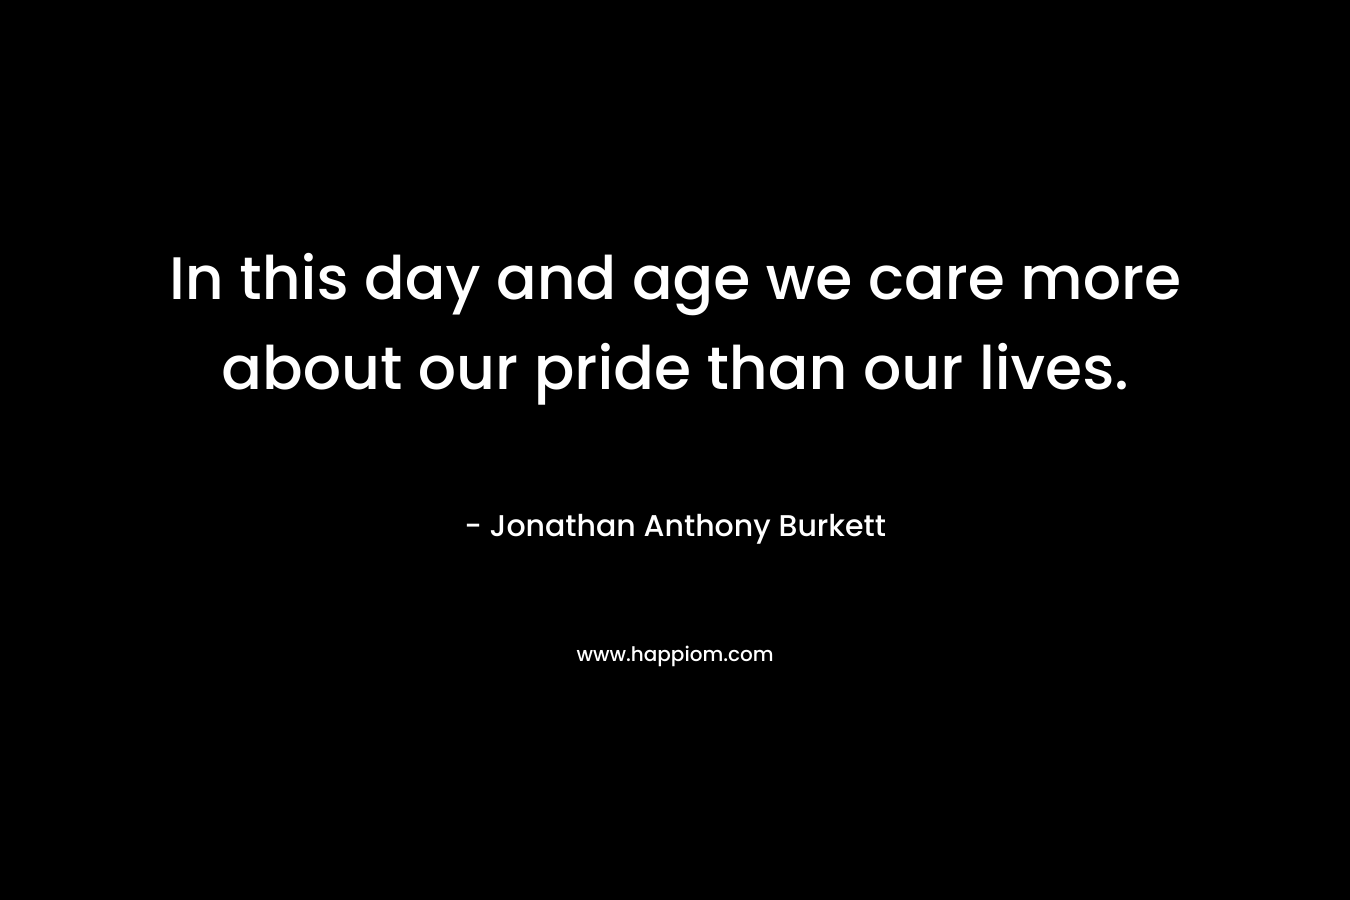 In this day and age we care more about our pride than our lives.